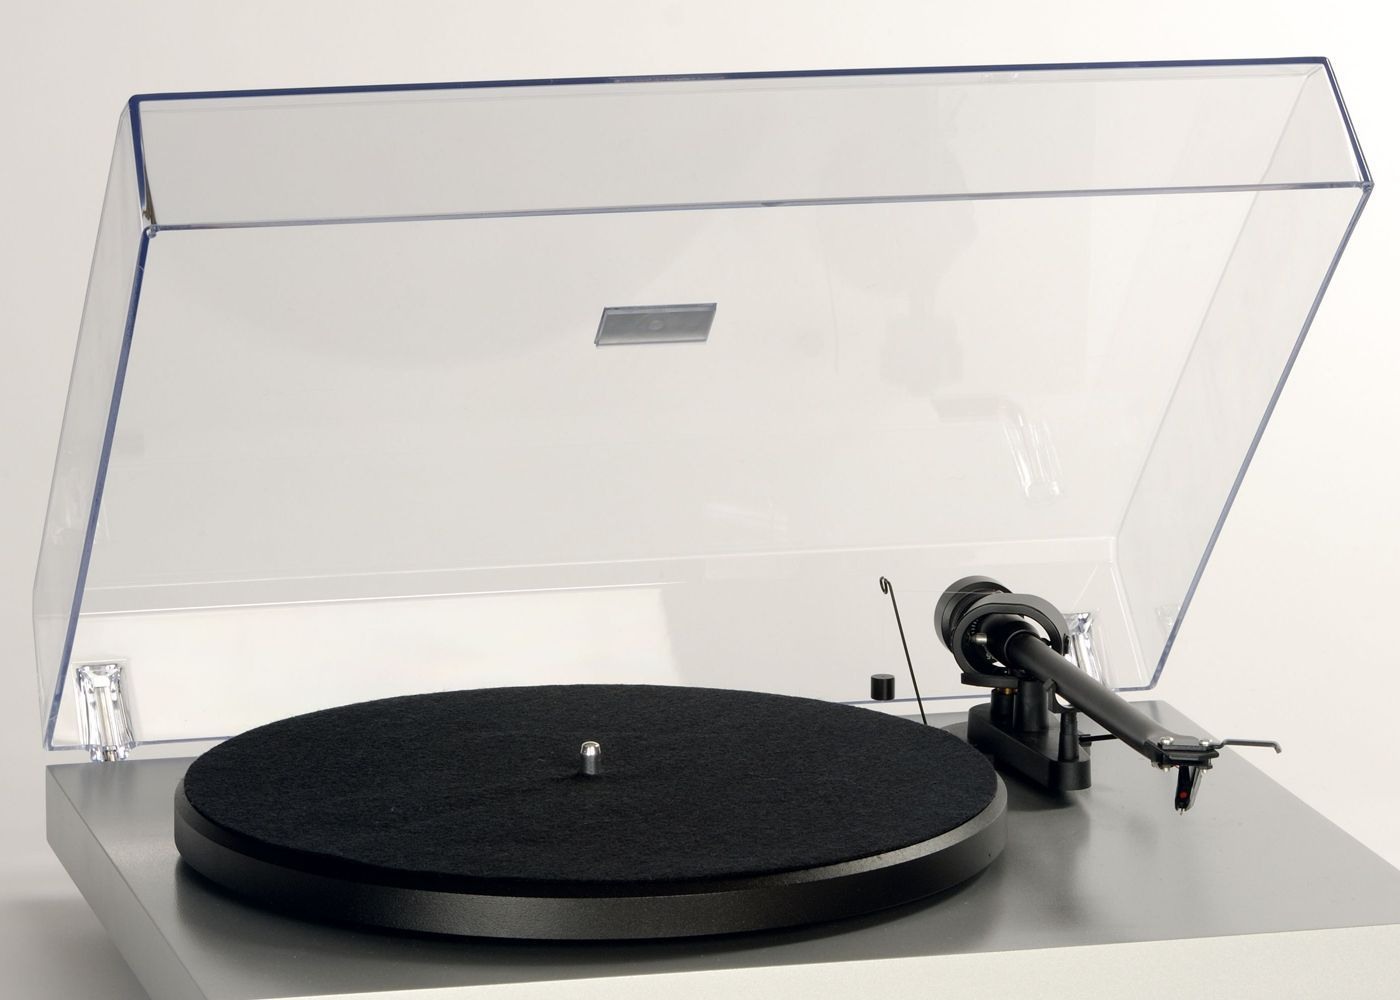 Pro ject turntable accessories